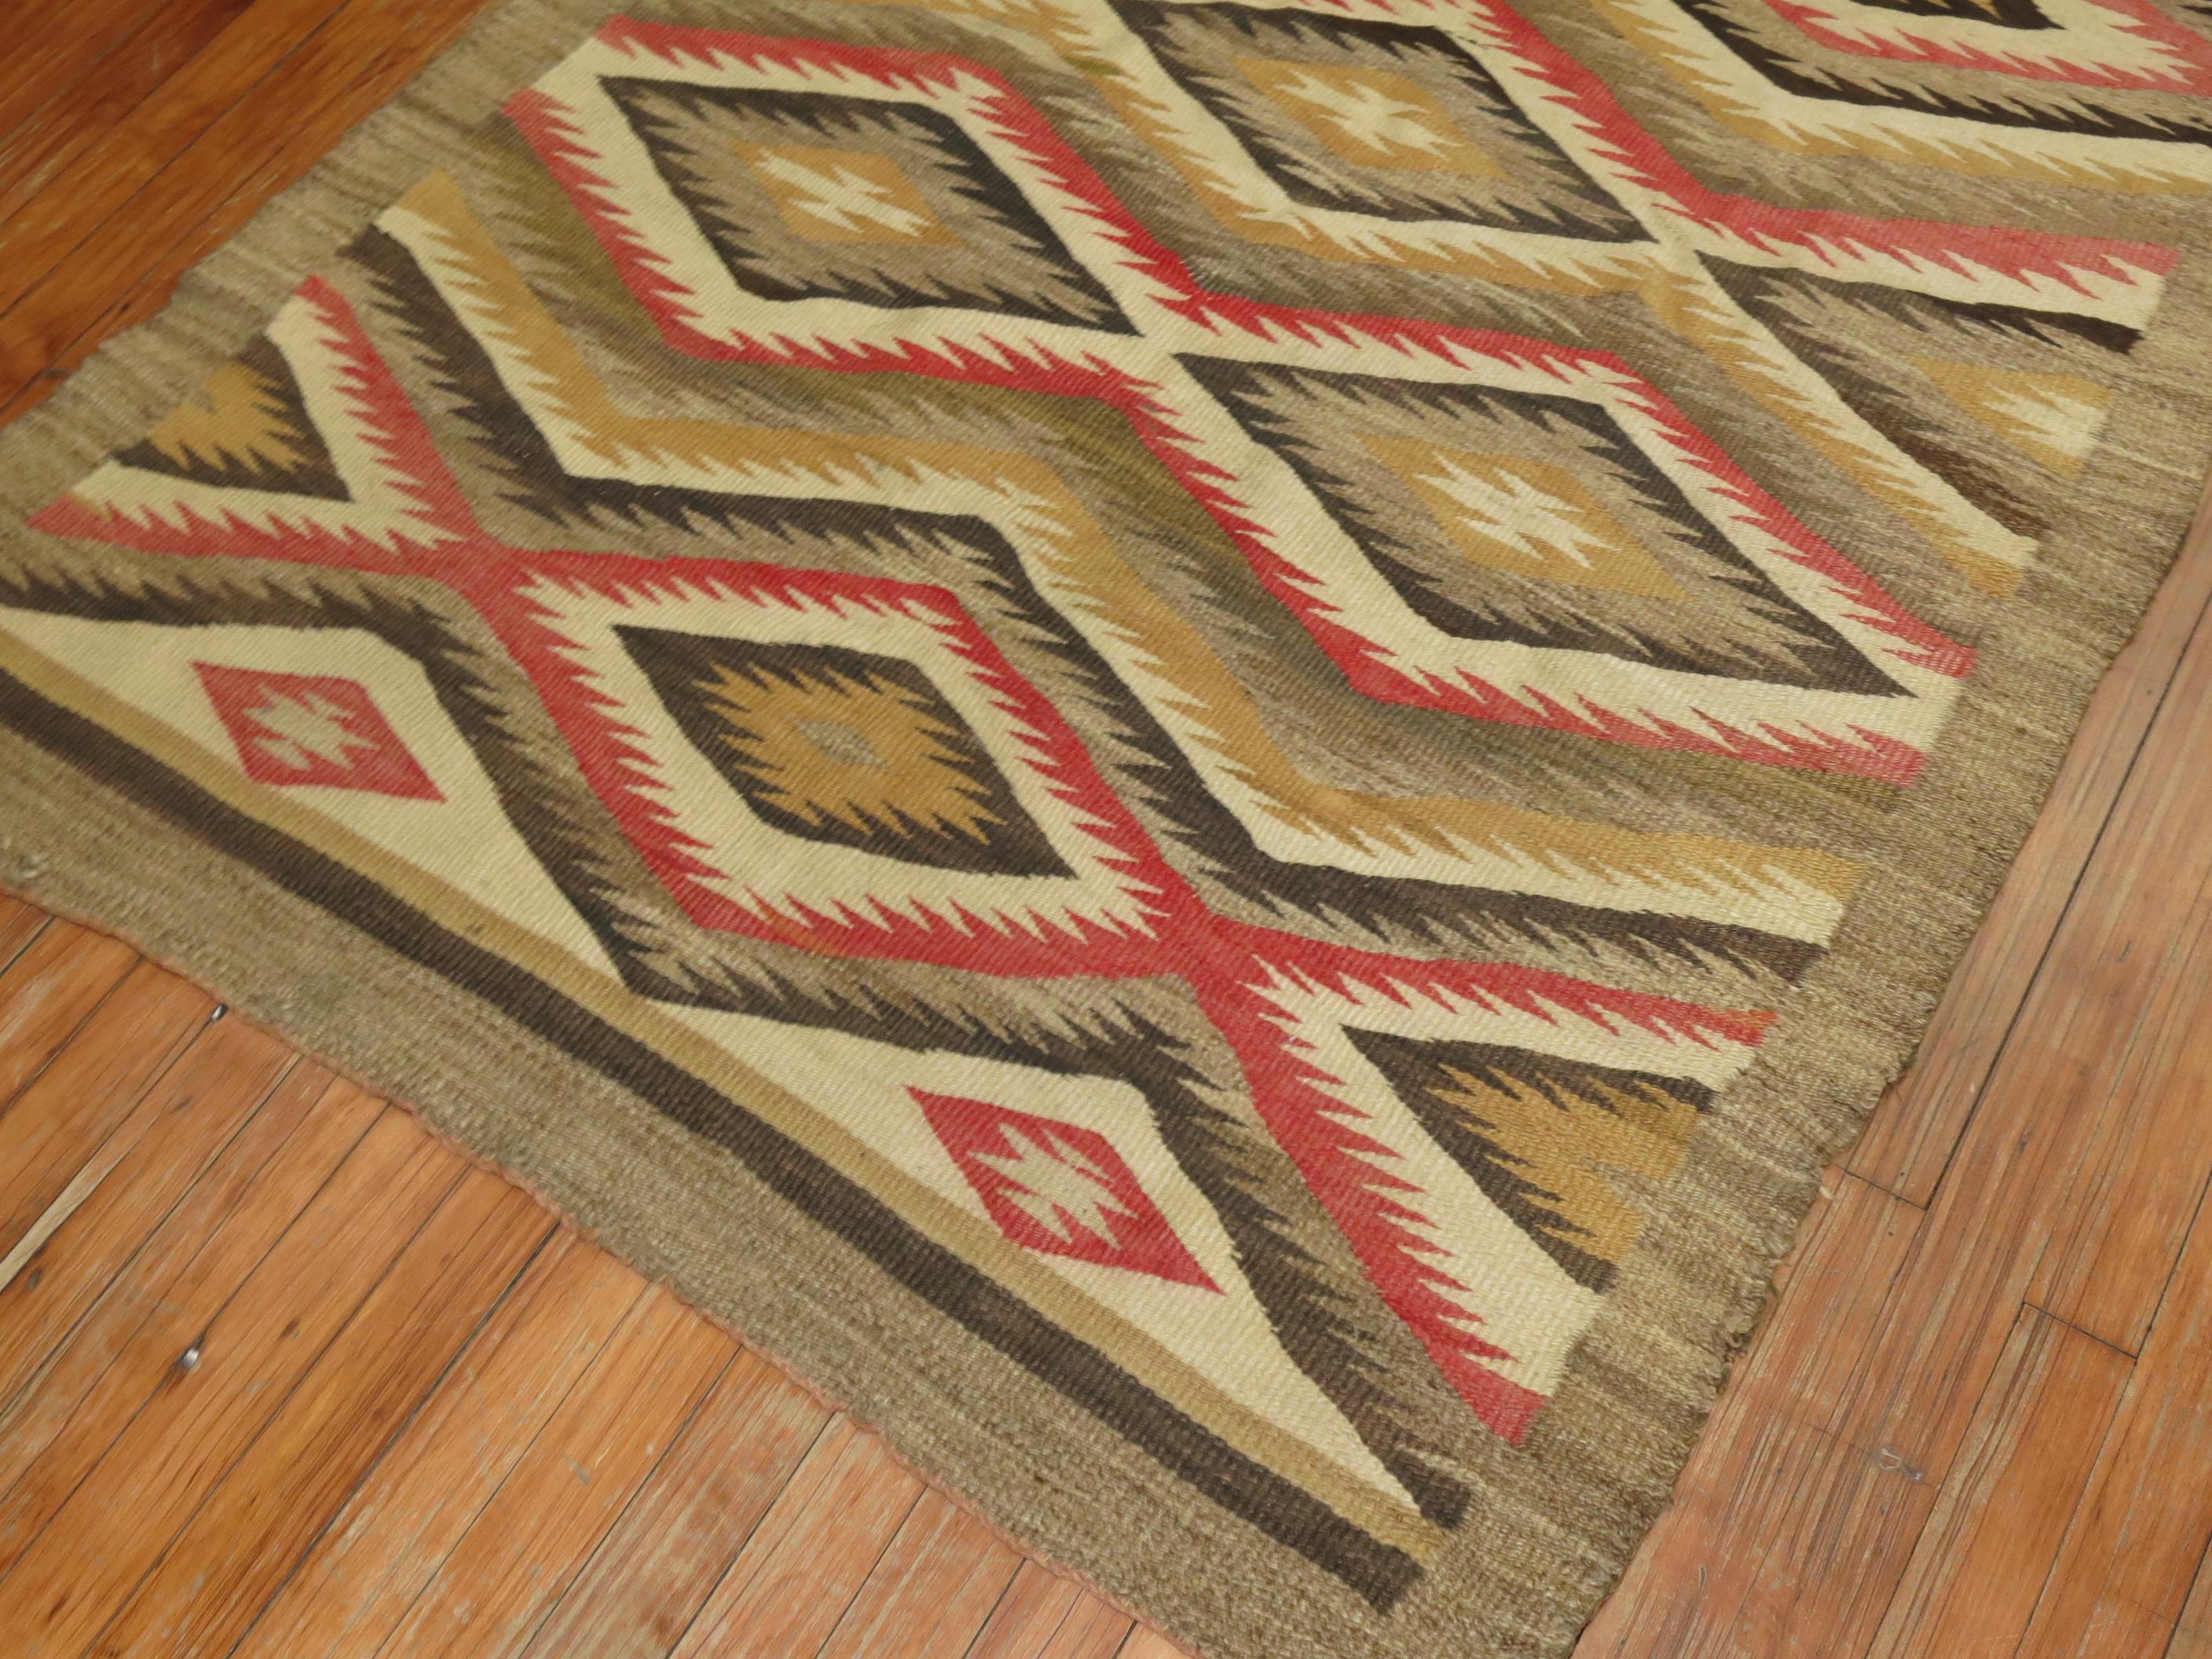 A highly decorative 20th century American Navajo Rug with an all-over geometric tribal design in red, brown accents on a camel field.

3'9'' x 5'2''
     